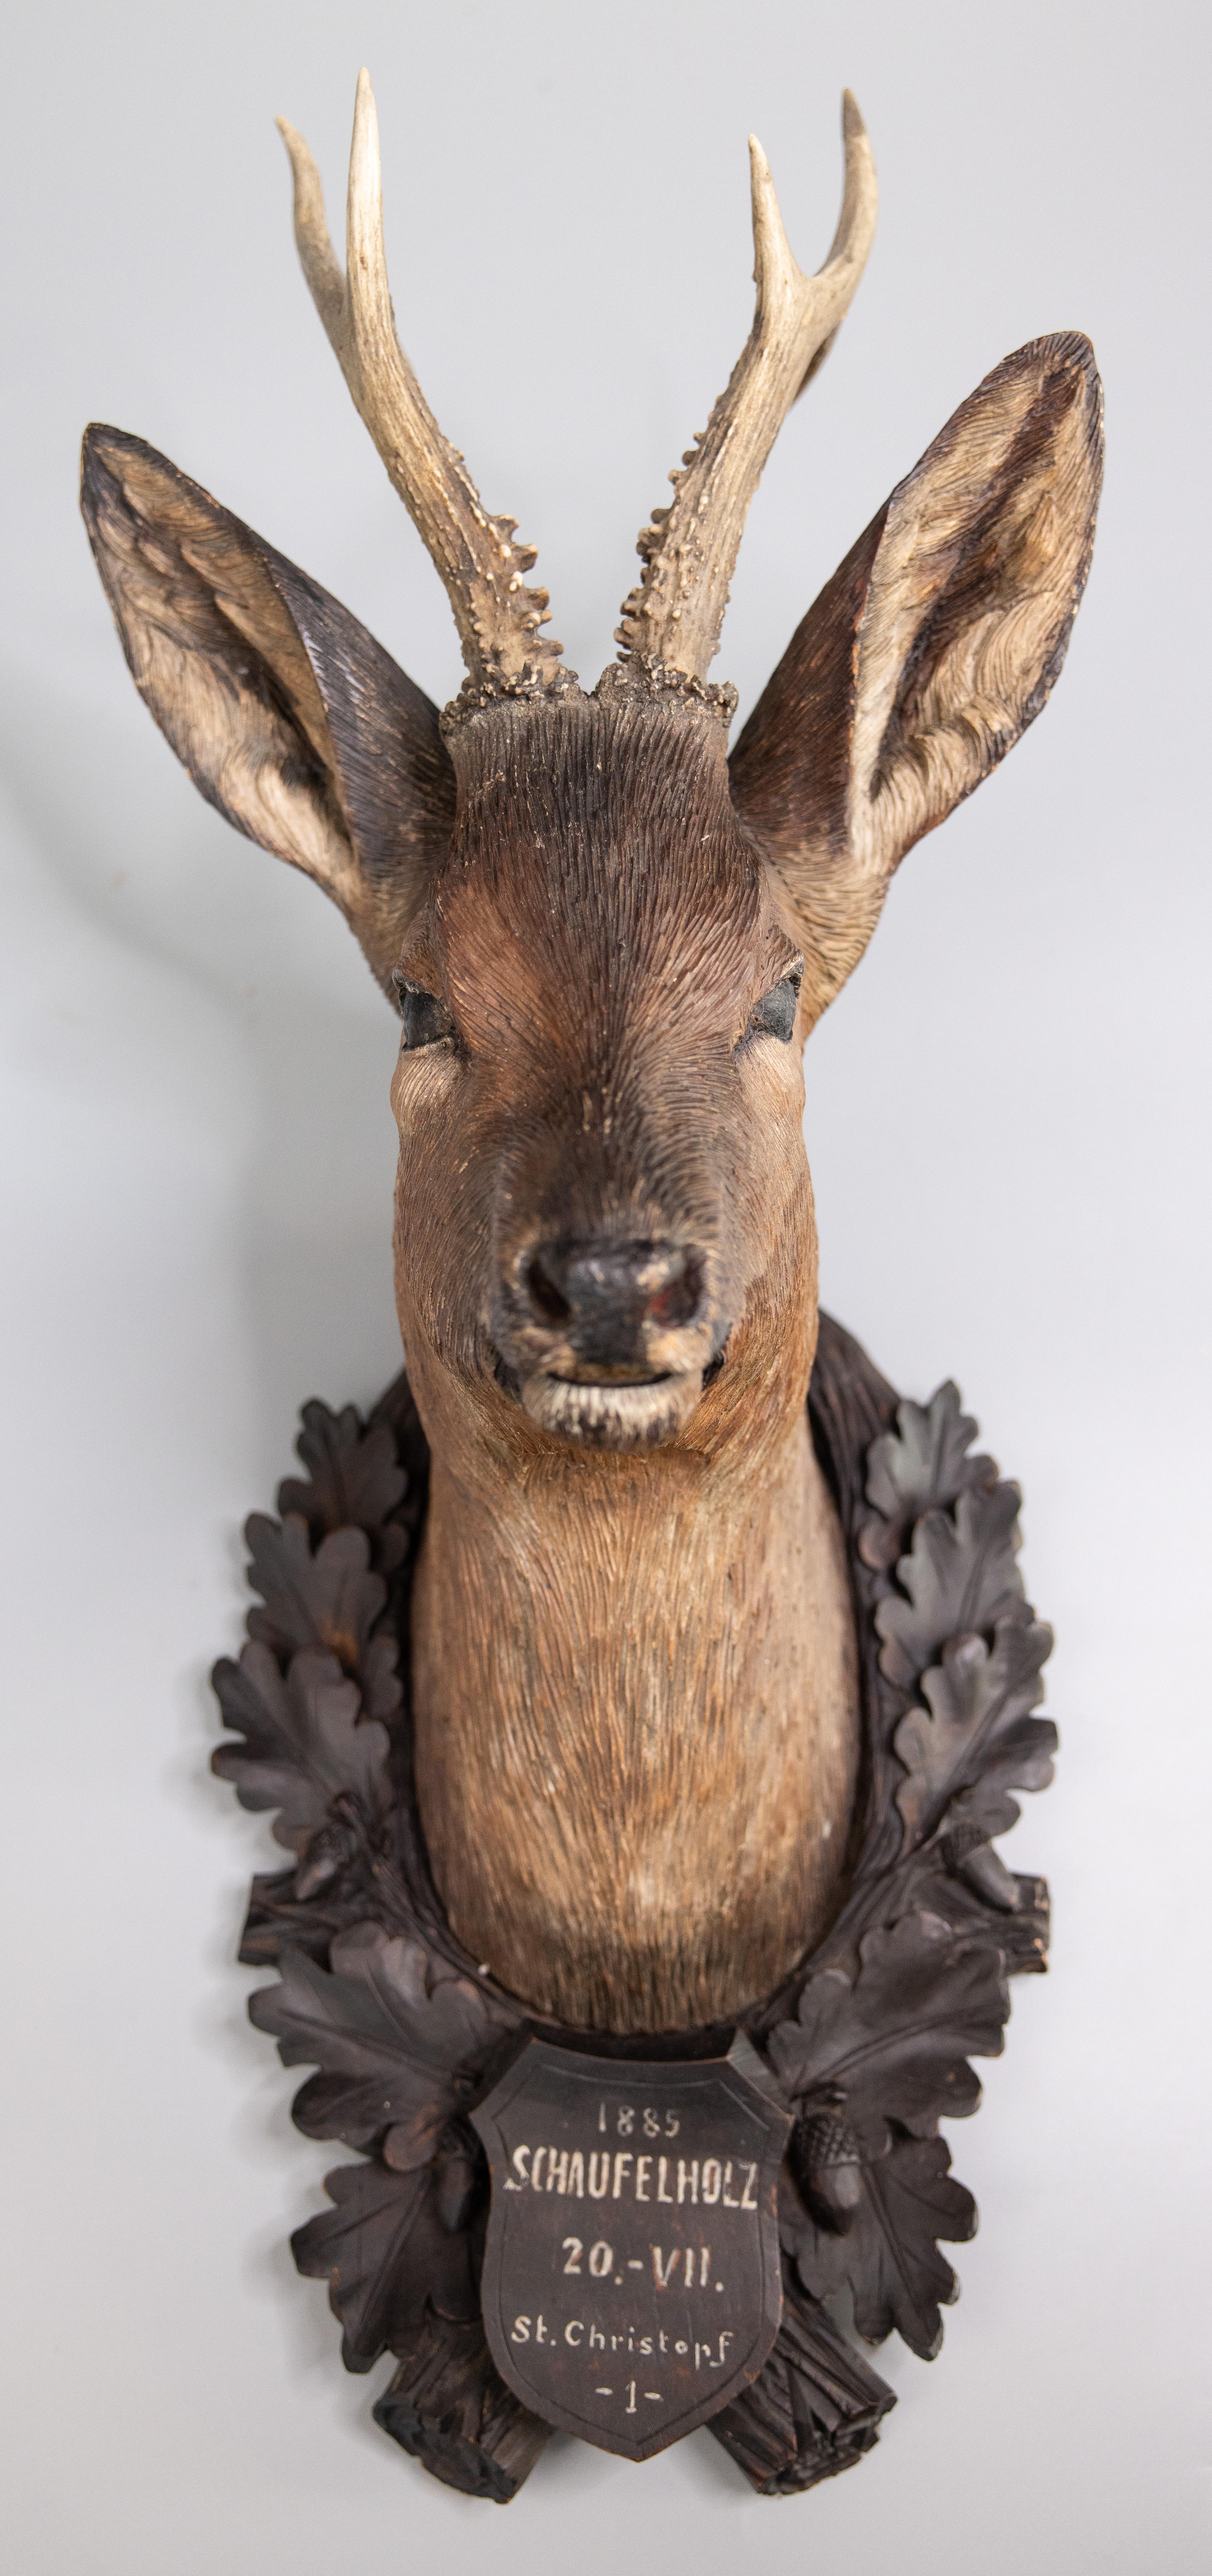 Austrian Black Forest Carved Stag Deer Head With Real Antlers Trophy Mount Plaque 1885